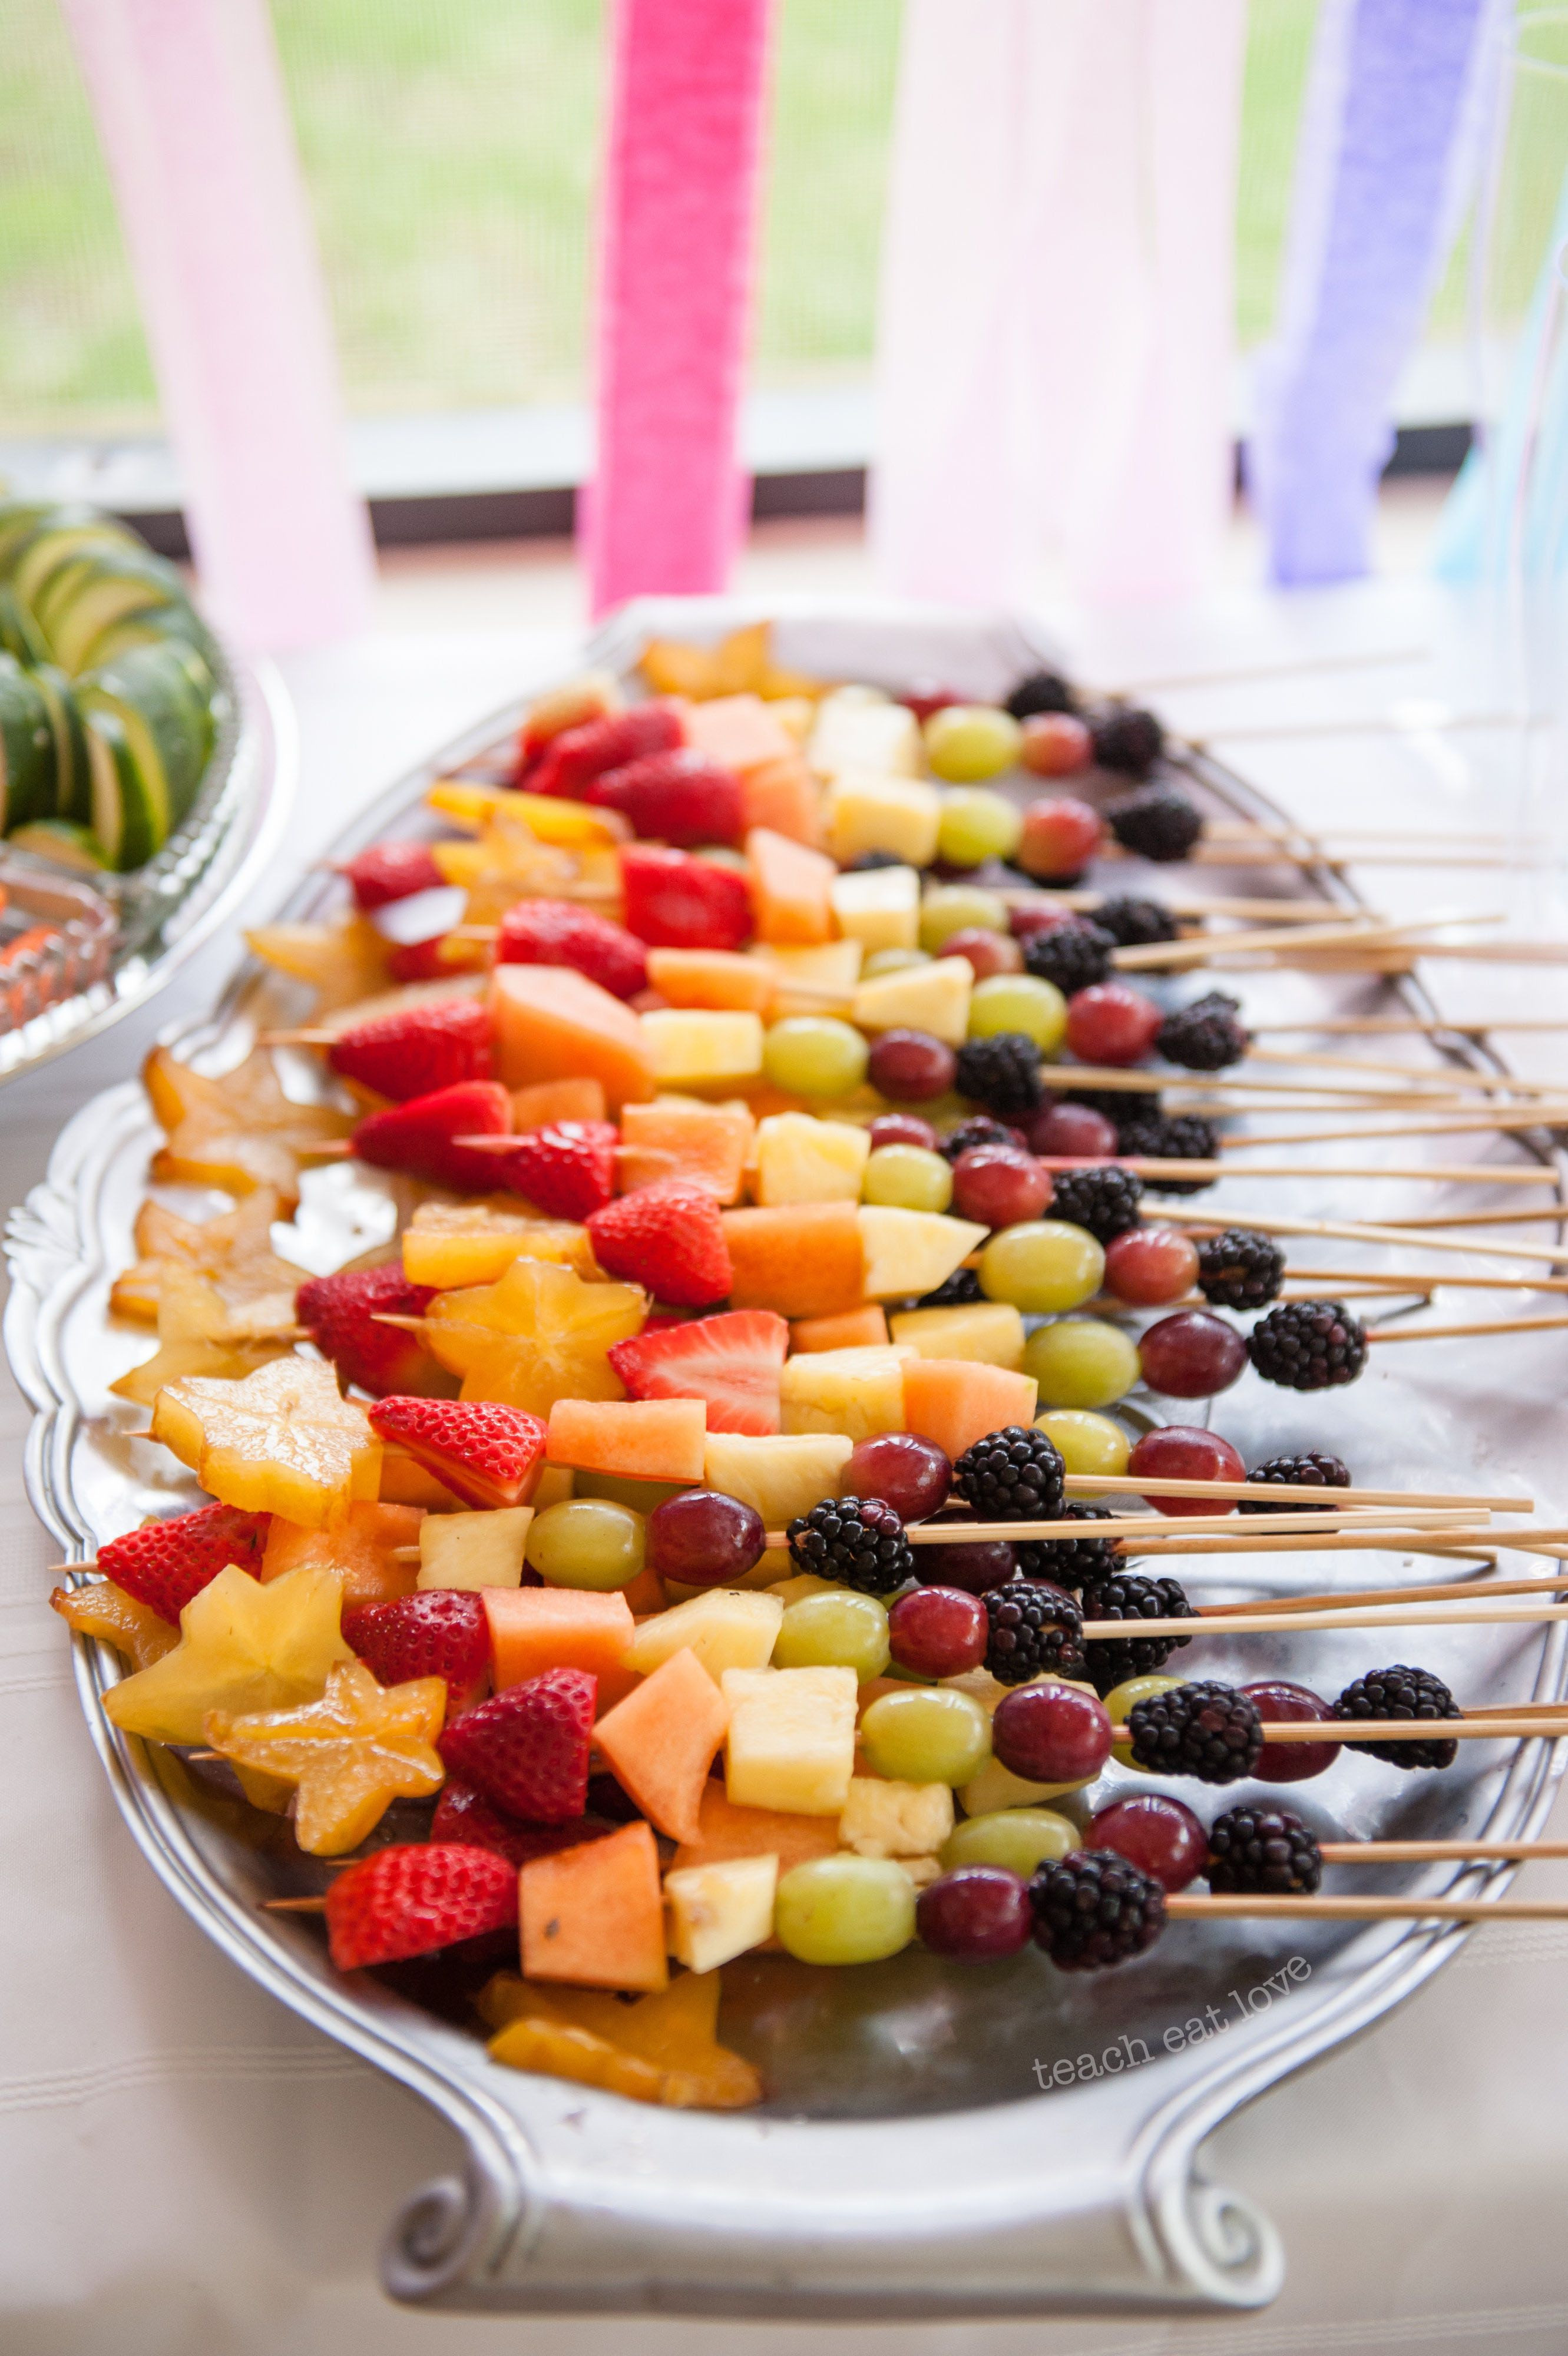 Party Food Menus Ideas
 The Baby’s First Birthday Recipe Round up and Fruit